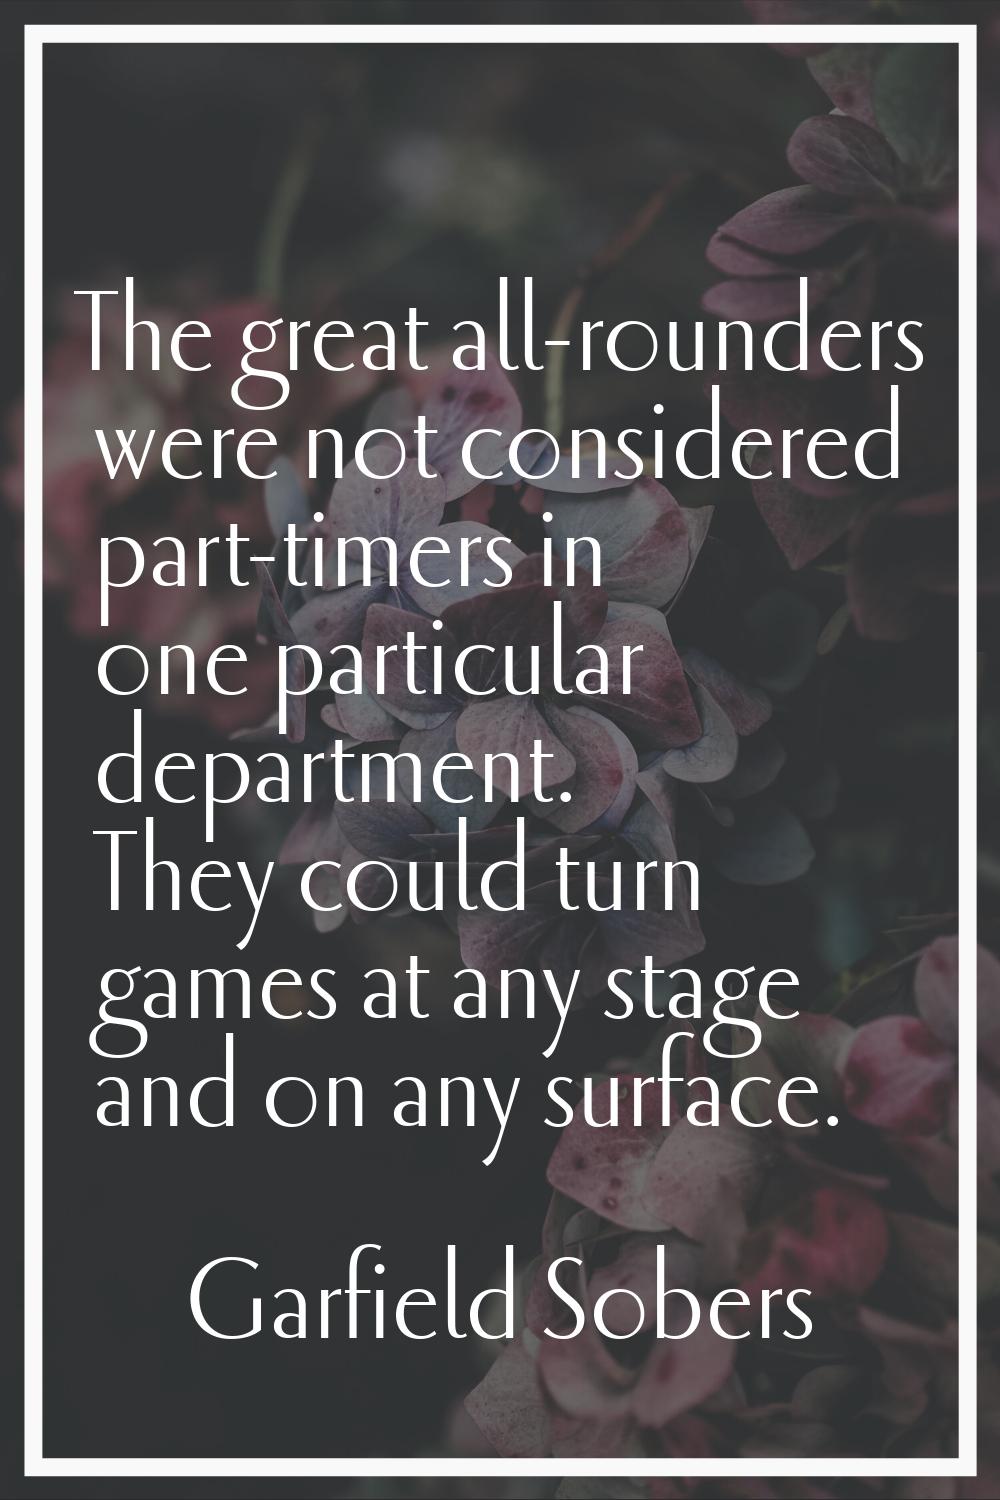 The great all-rounders were not considered part-timers in one particular department. They could tur